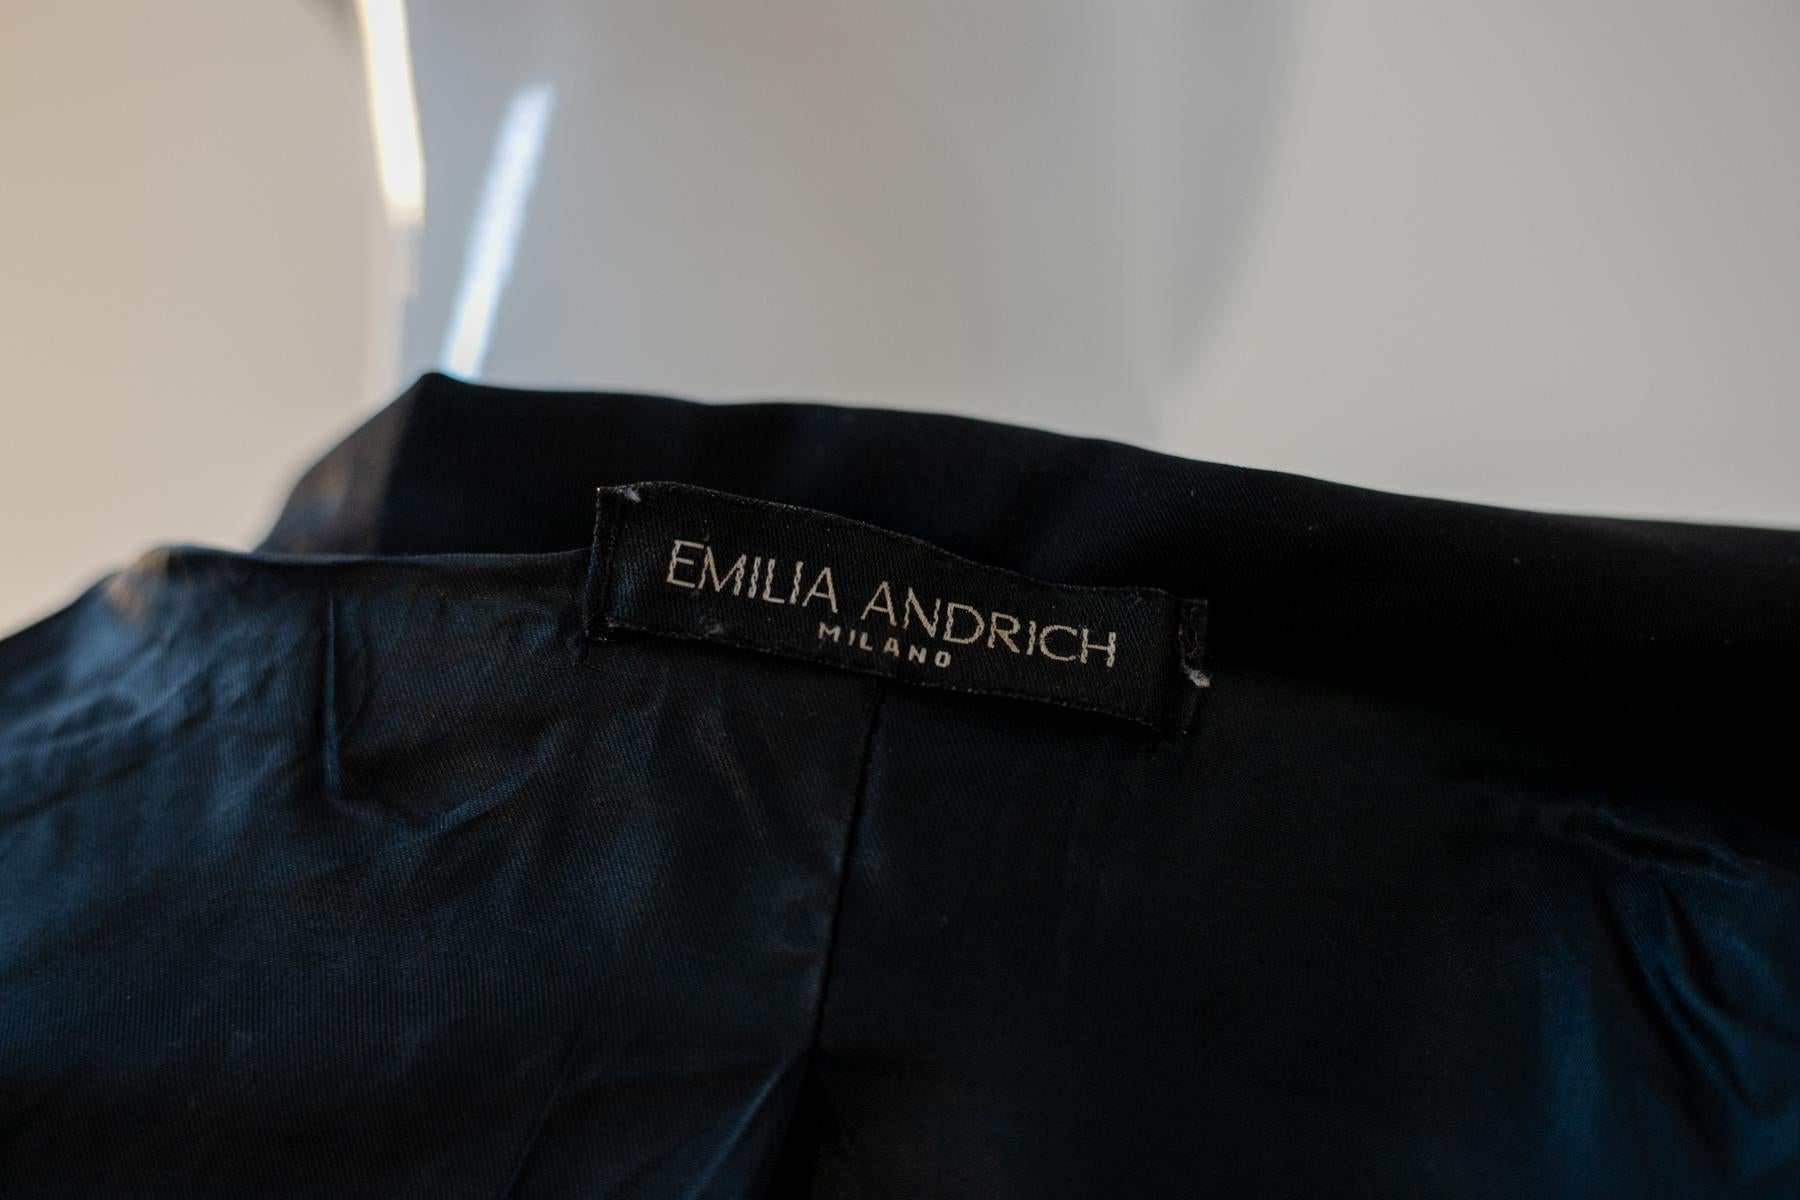 Irresistible double-breasted black trench coat by Emilia Andrich from the 2000s, made in Italy. ORIGINAL LABEL.
The trench coat is totally made of black cotton, with a collar with a long and deep list cut, which connects to the central part of the